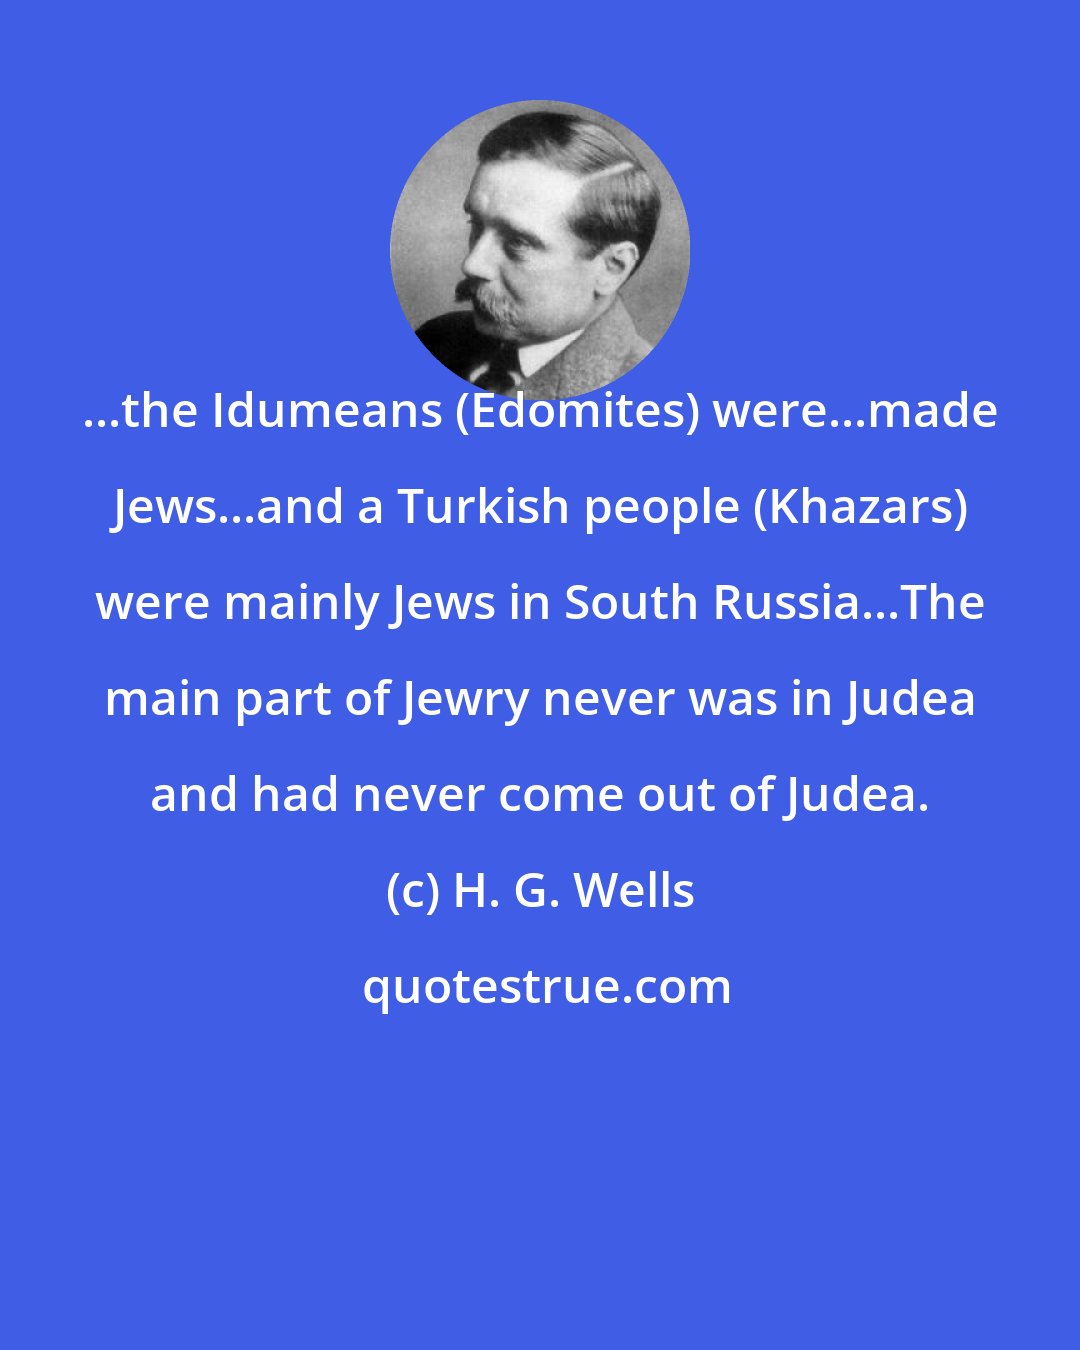 H. G. Wells: ...the Idumeans (Edomites) were...made Jews...and a Turkish people (Khazars) were mainly Jews in South Russia...The main part of Jewry never was in Judea and had never come out of Judea.